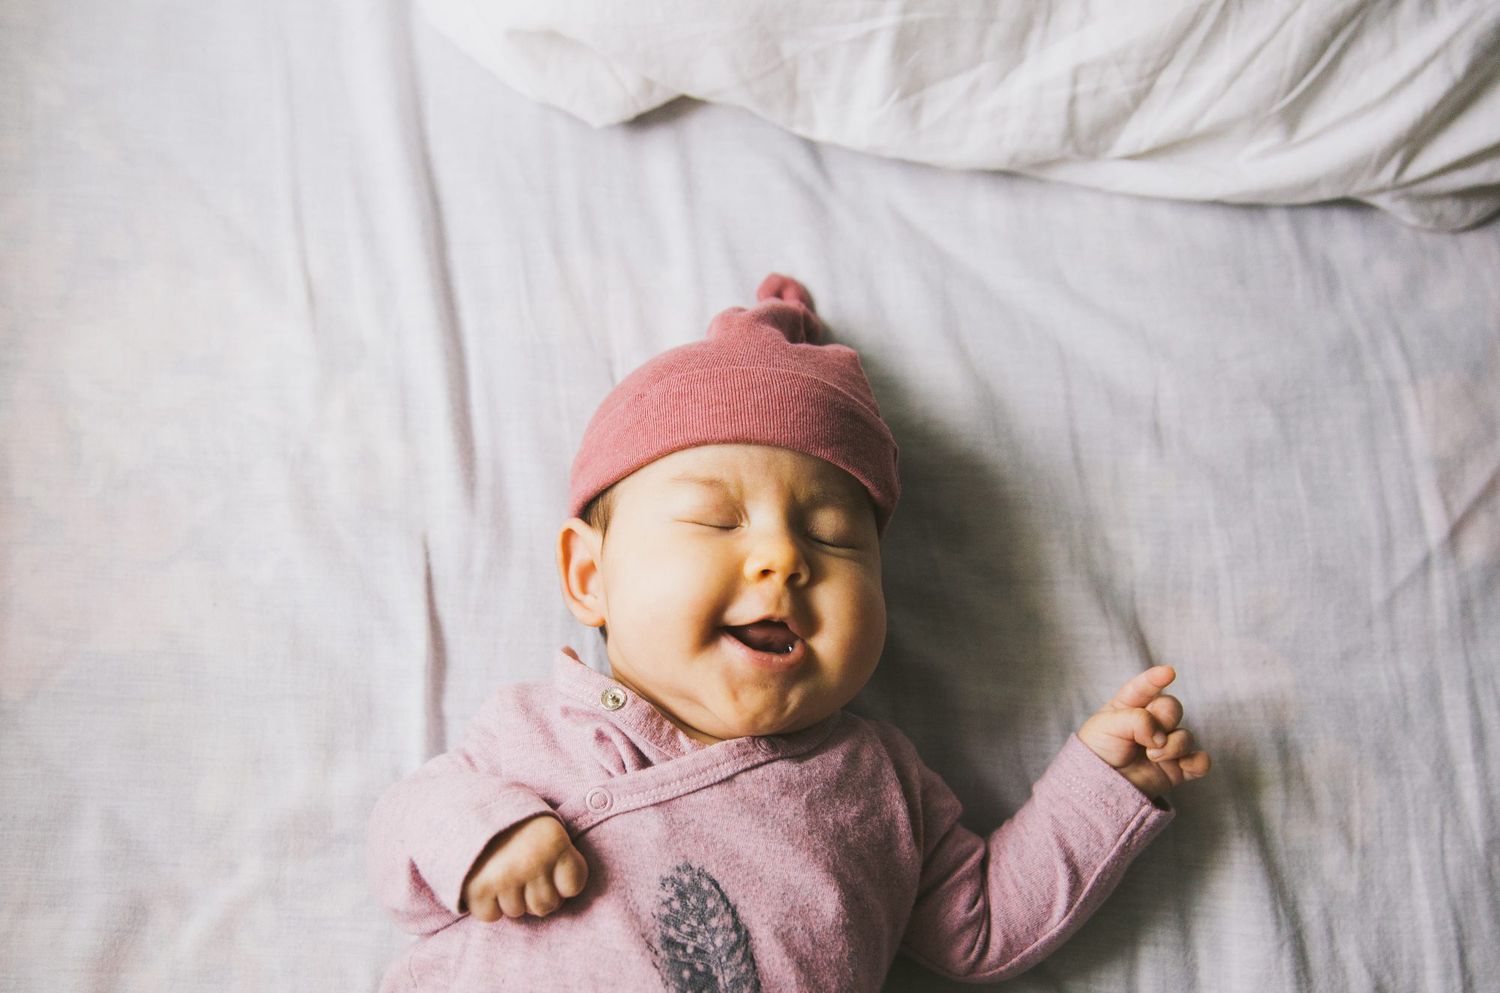 An image of a baby laughing.